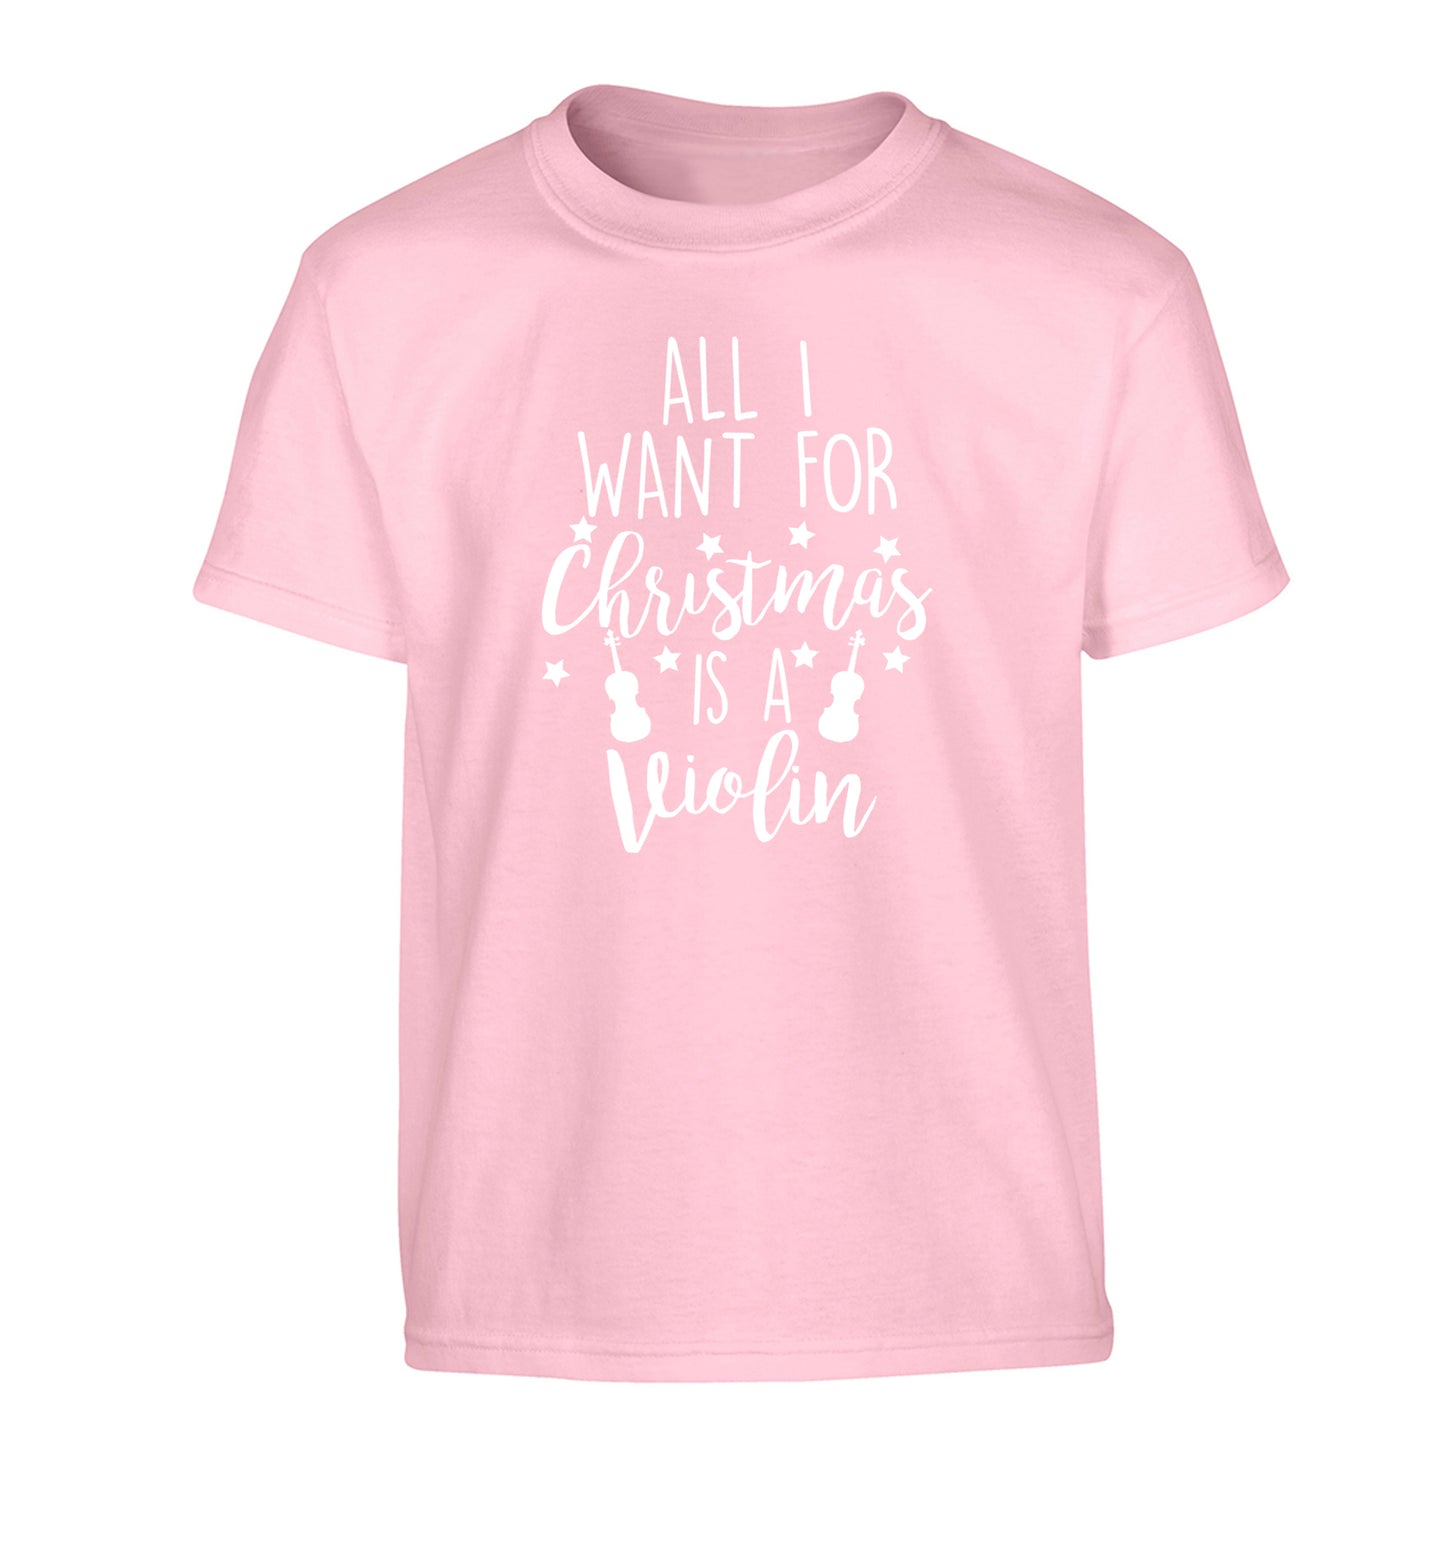 All I Want For Christmas is a Violin Children's light pink Tshirt 12-13 Years